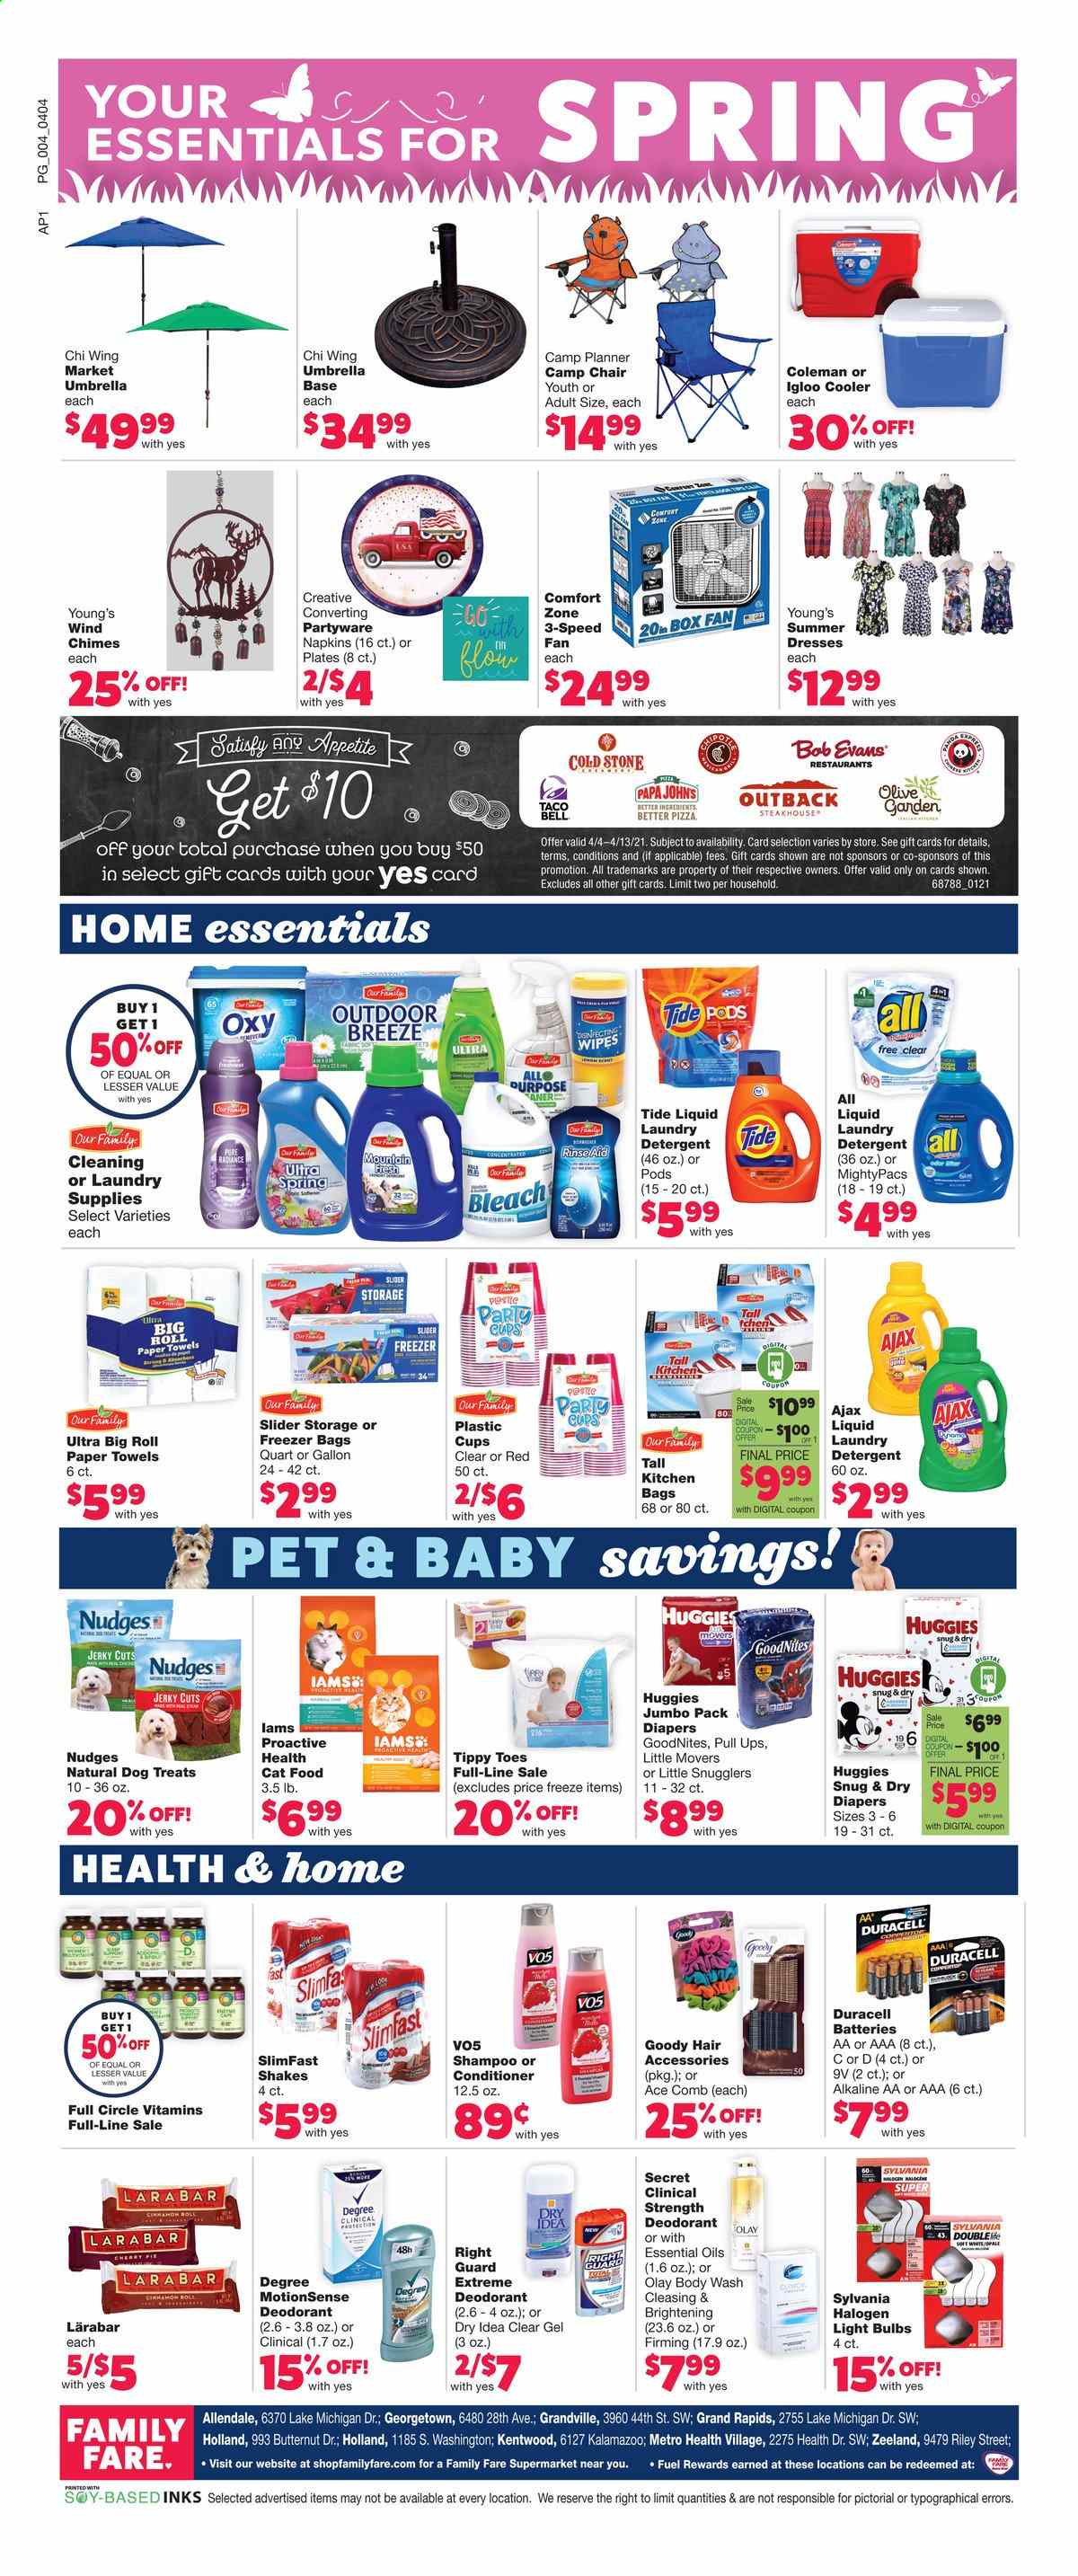 thumbnail - Family Fare Flyer - 04/04/2021 - 04/10/2021 - Sales products - pizza, Slimfast, Bob Evans, jerky, shake, Huggies, napkins, kitchen towels, paper towels, detergent, wipes, Ajax, Ace, Tide, fabric softener, bleach, laundry detergent, body wash, shampoo, Olay, conditioner, comb, VO5, anti-perspirant, deodorant, plate, cup, freezer bag, essential oils, battery, bulb, Duracell, light bulb, Sylvania, chimes, butternut squash. Page 4.